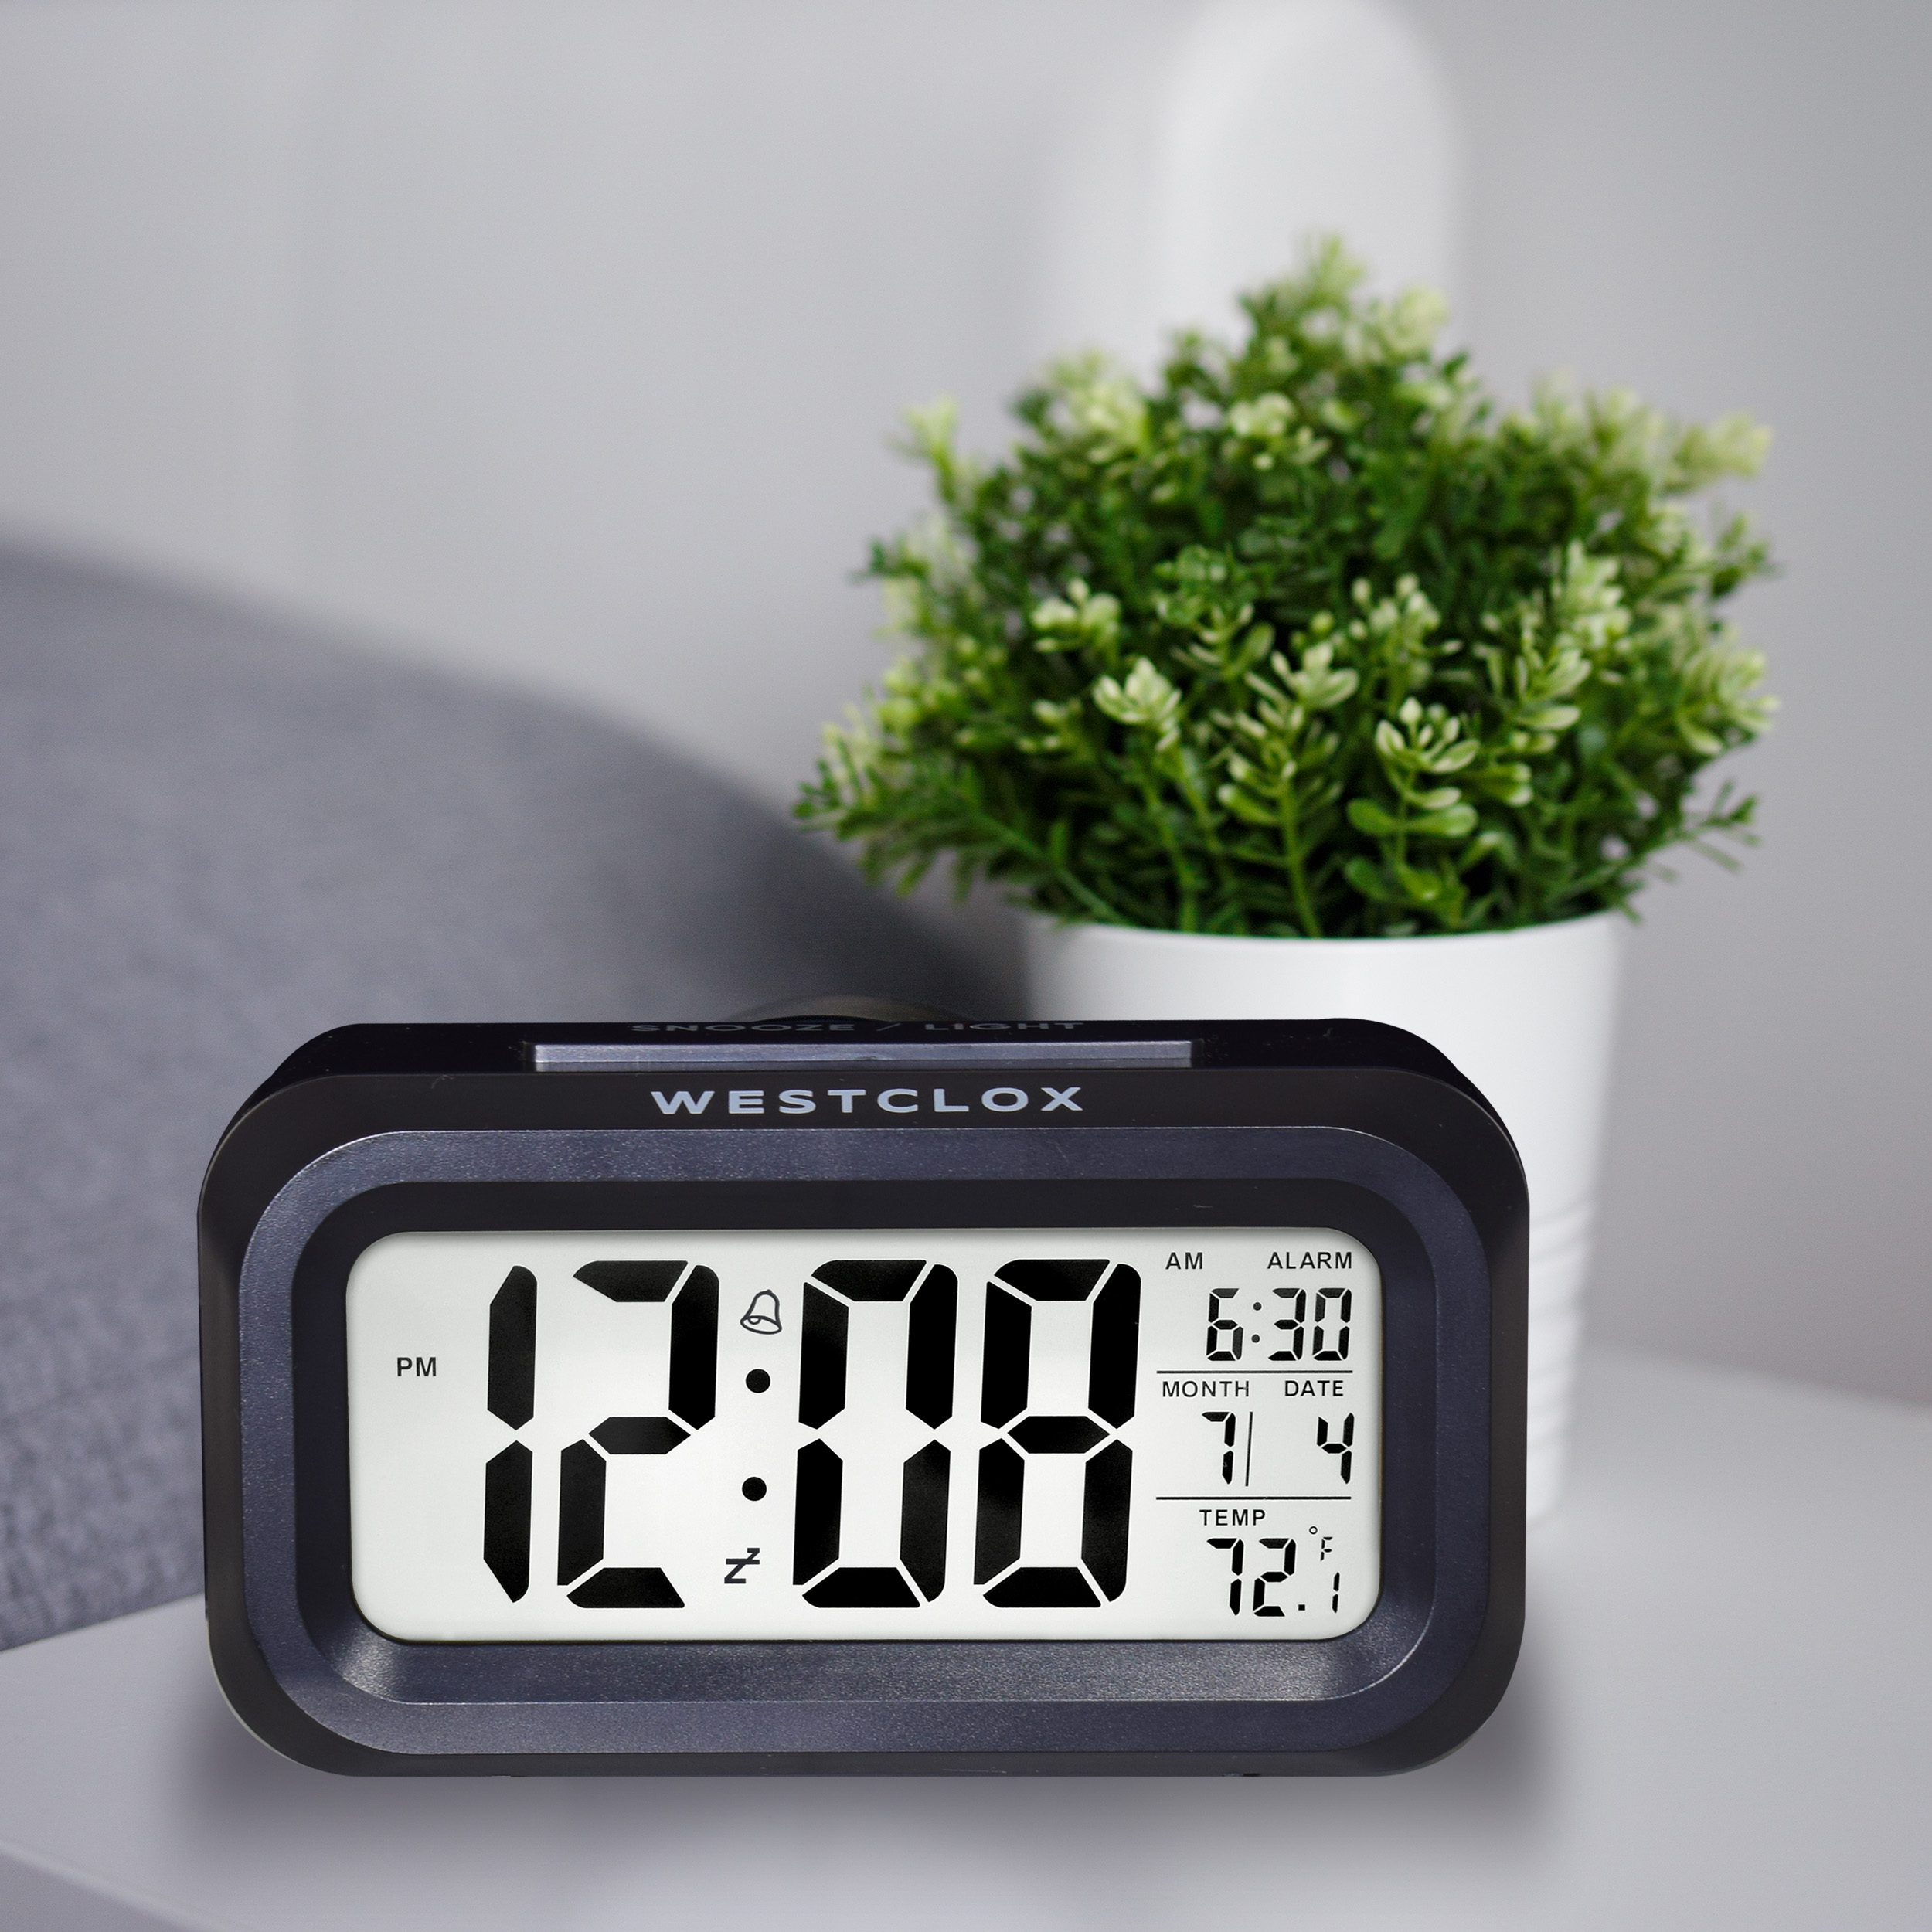 Mainstays Black Digital Alarm Clock with LED Backlight and Easy-to-Read LCD Display - image 5 of 5